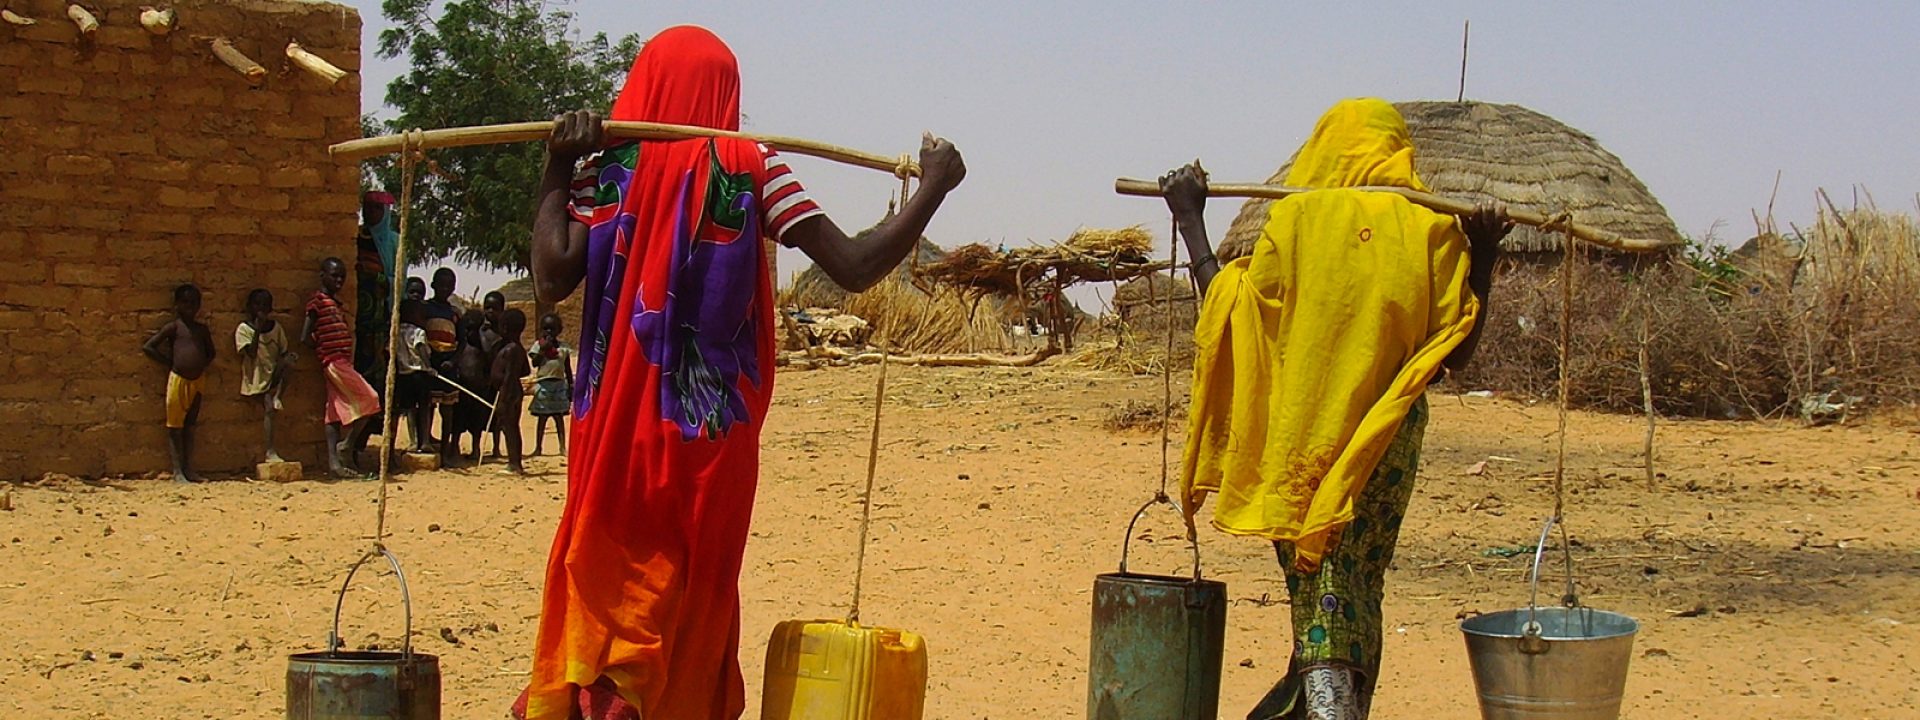 Water and women: we need to know more